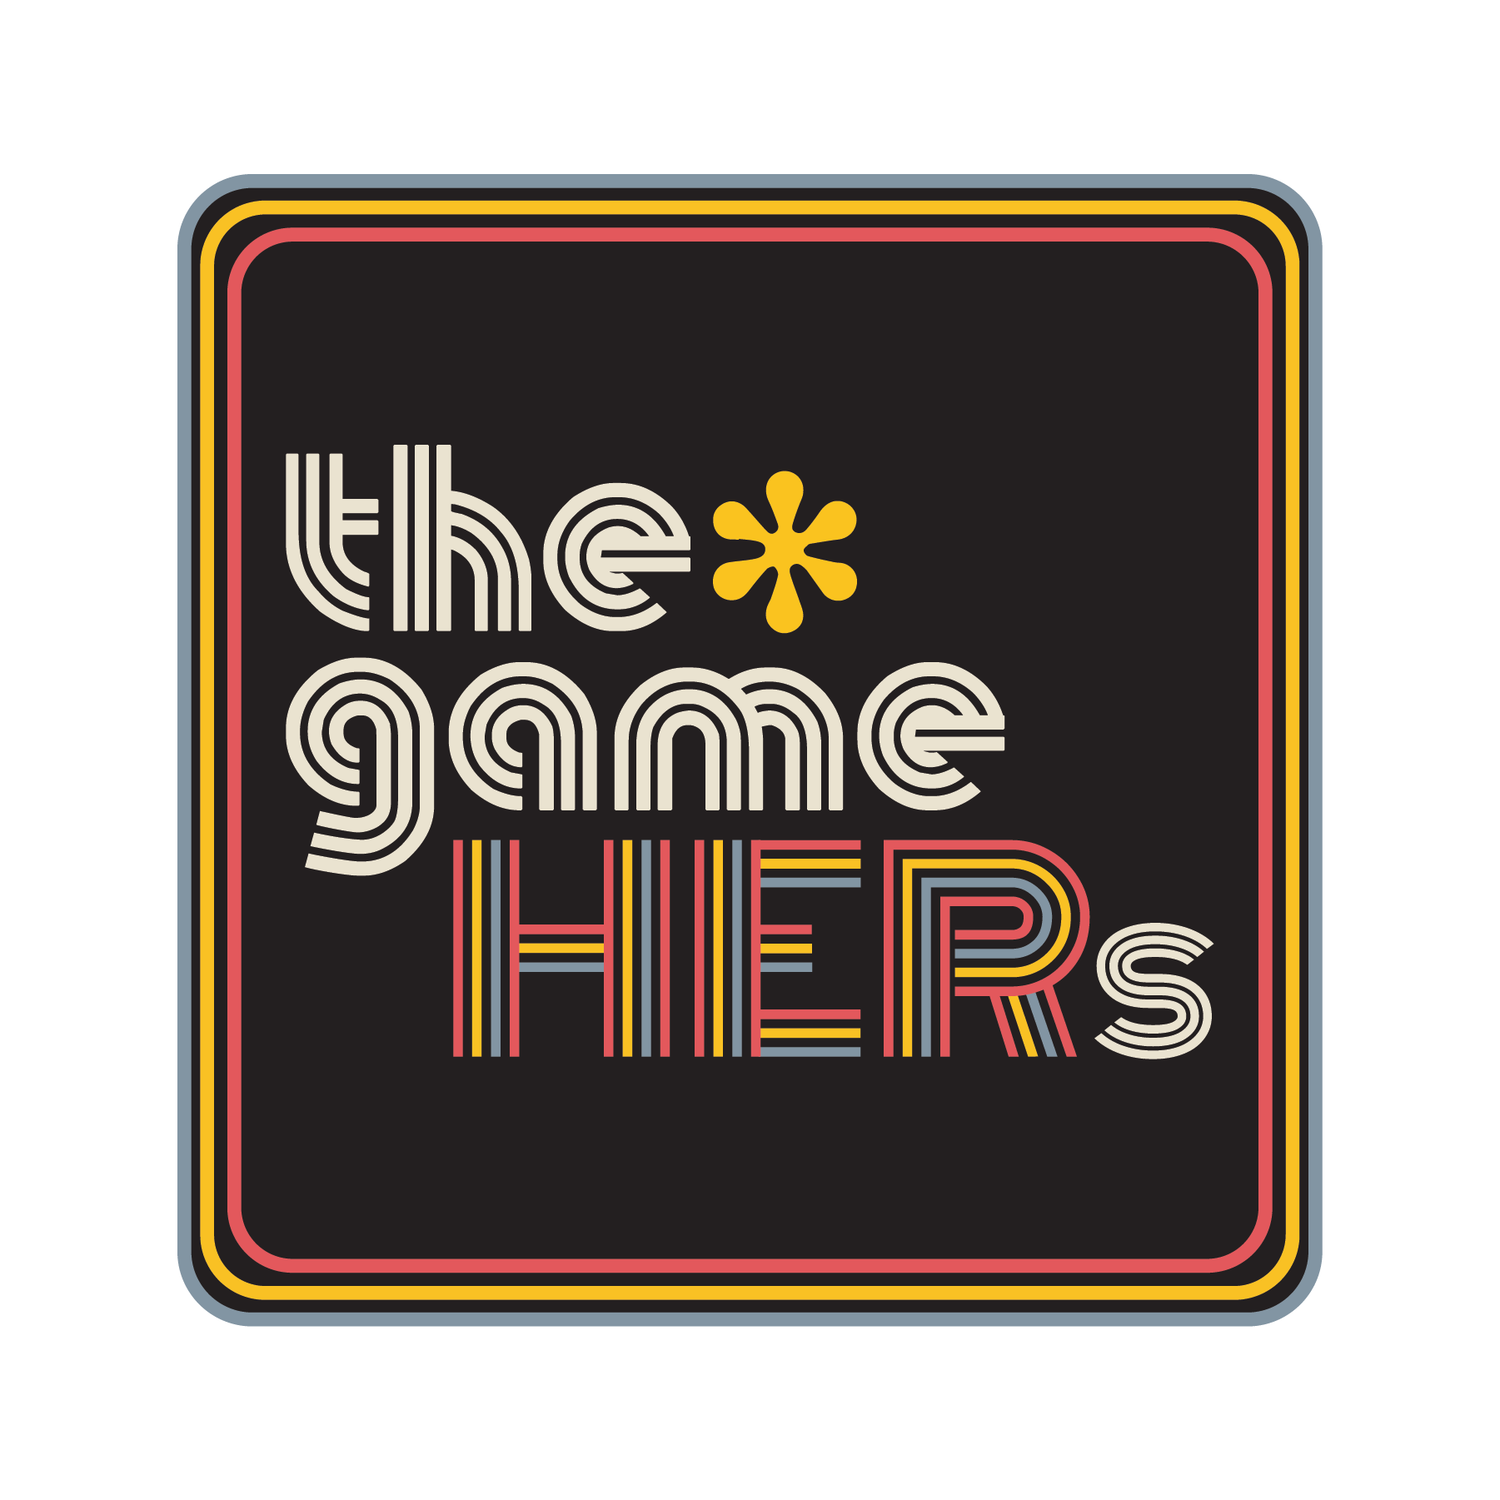 the*gameHERS